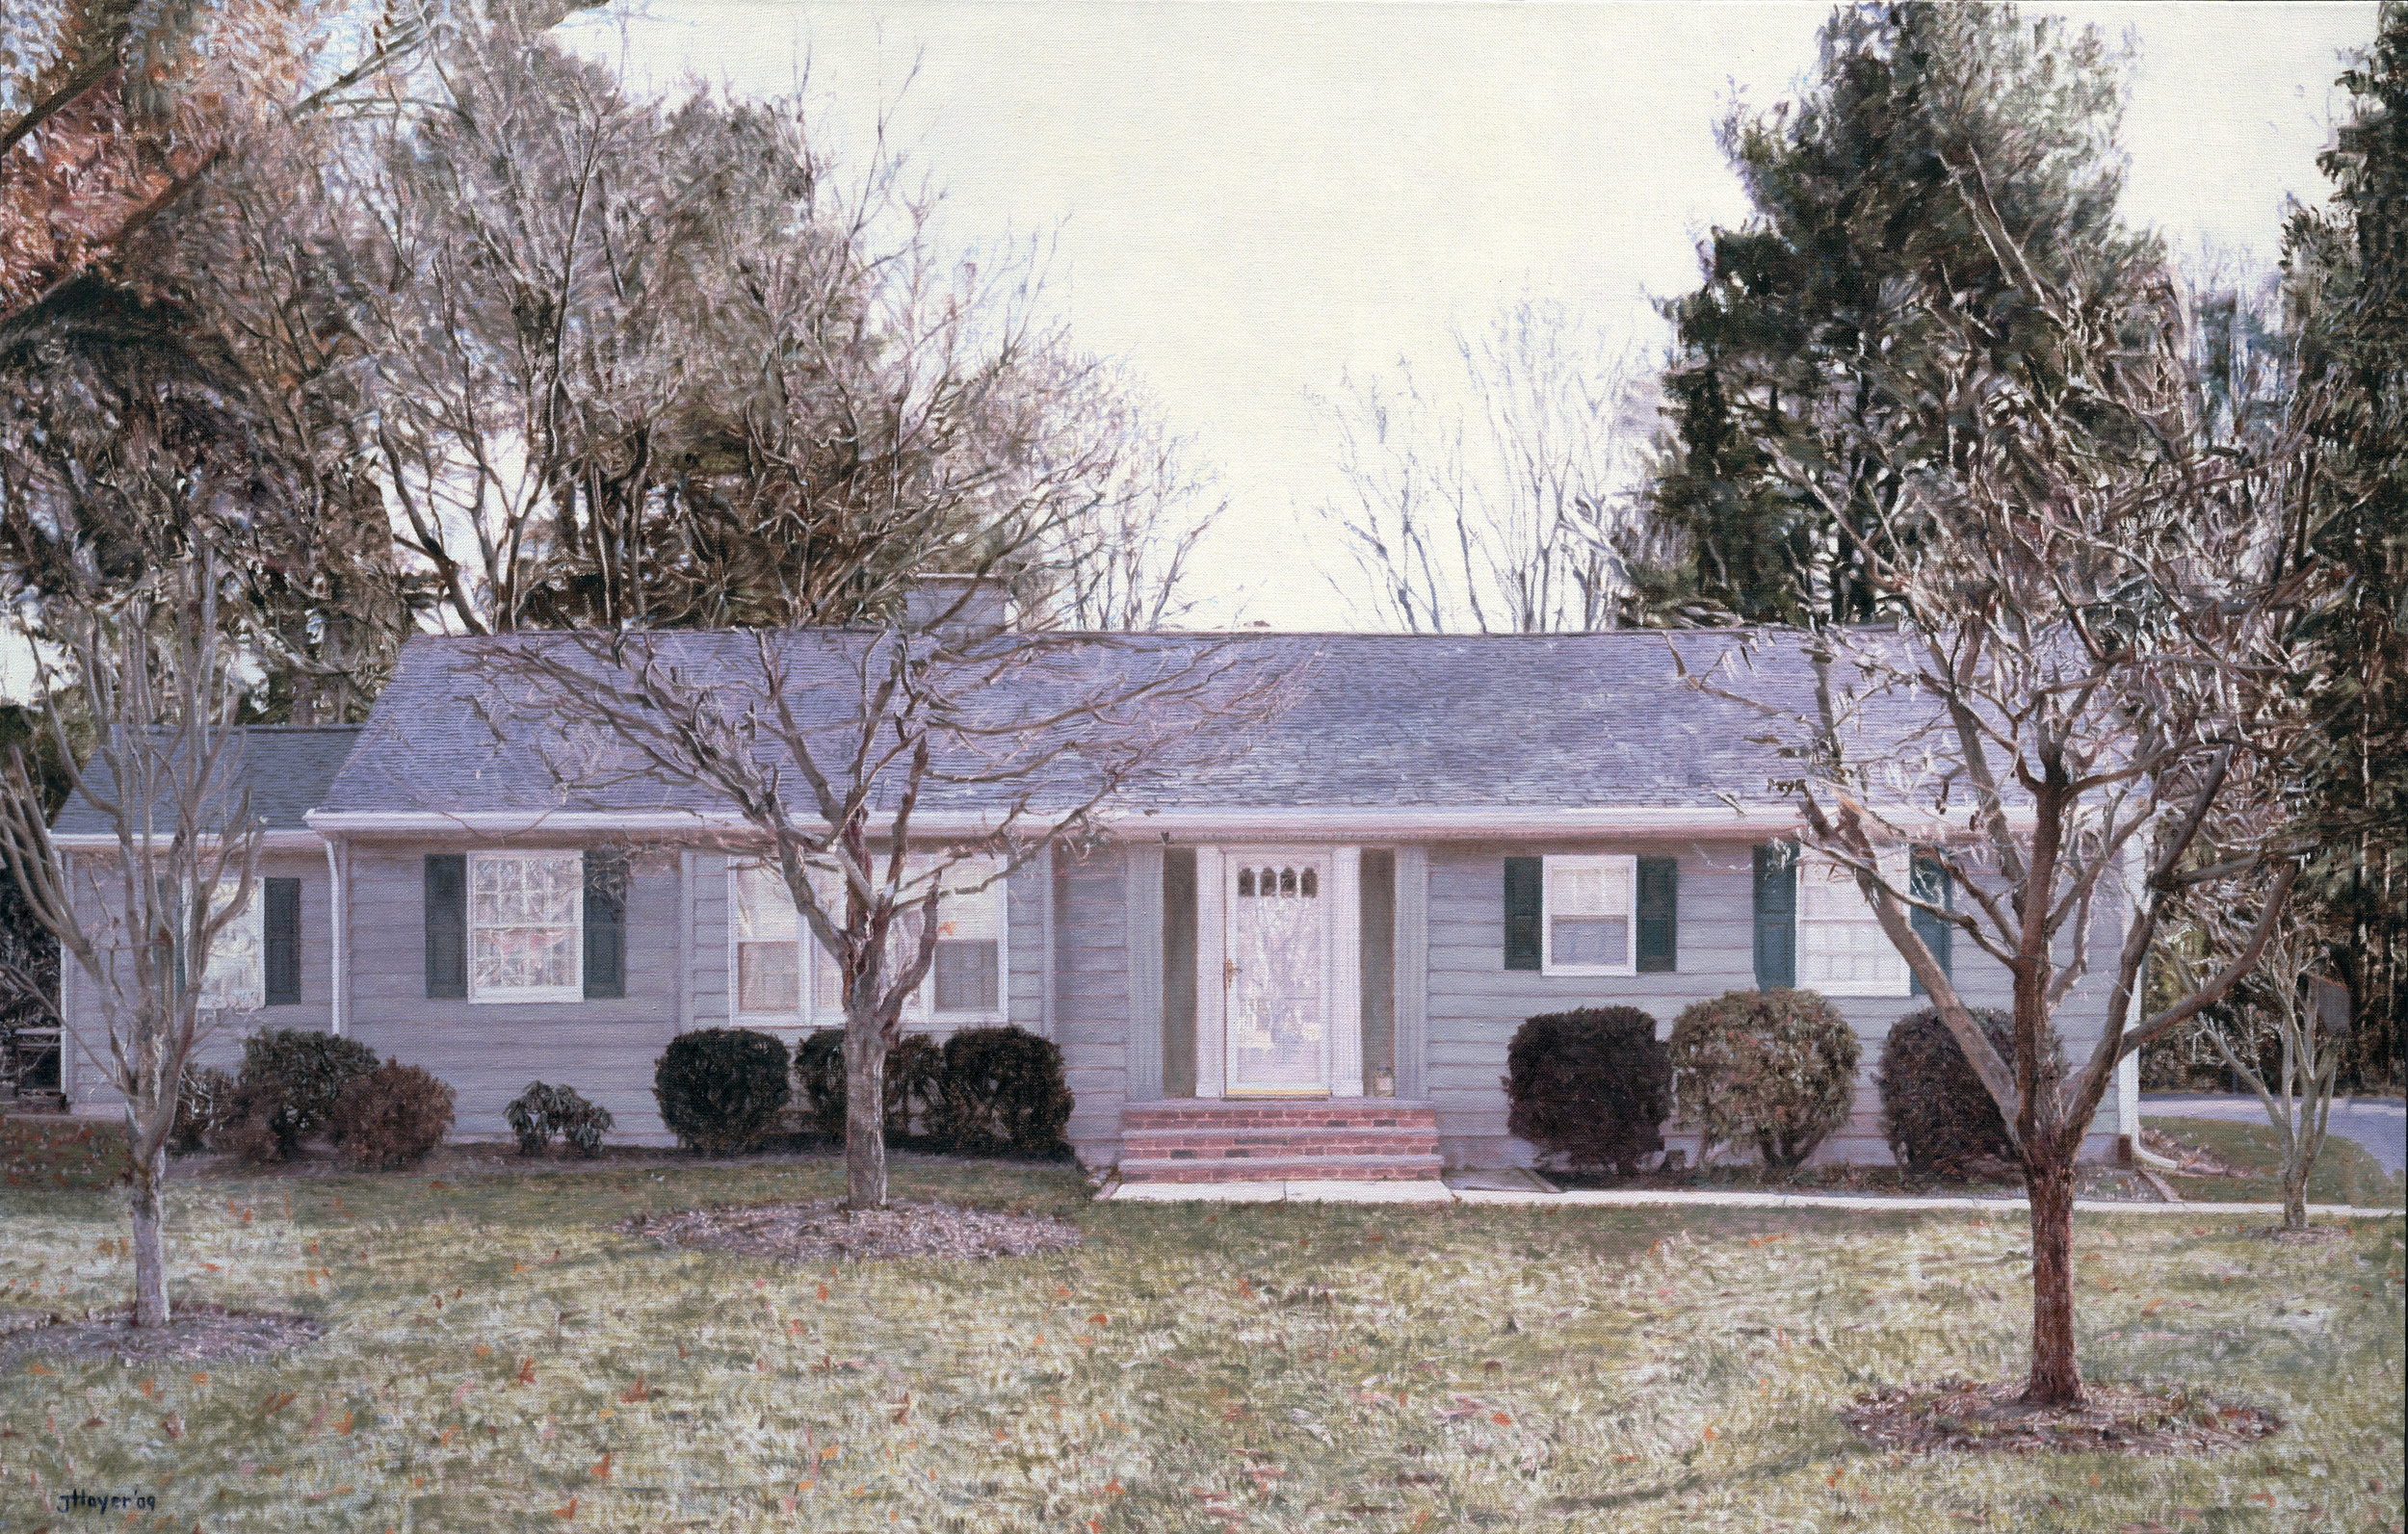   Yardley Ranch House , 2009 Oil on linen 35 1/2 x 59 inches 